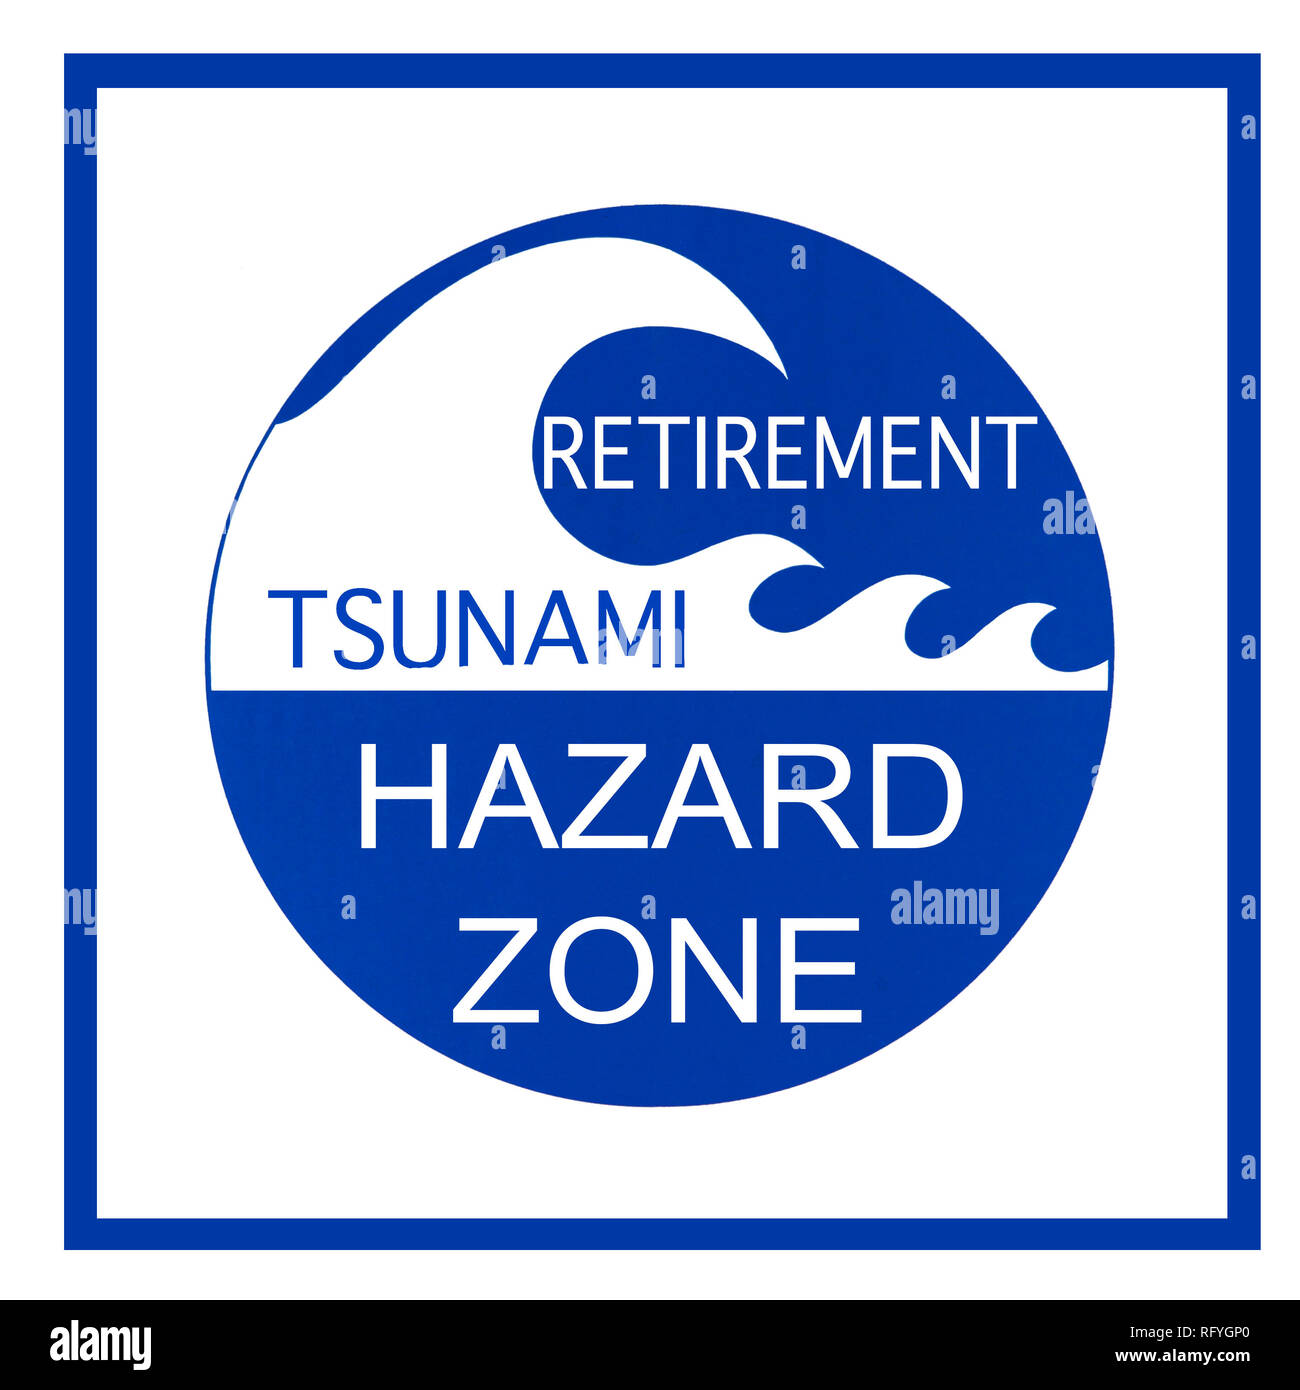 Retirment Tsunami Hazard Zone warning sign isolated on white background. Concept based on baby boomers soon to reach retirement age and lack of incomi Stock Photo